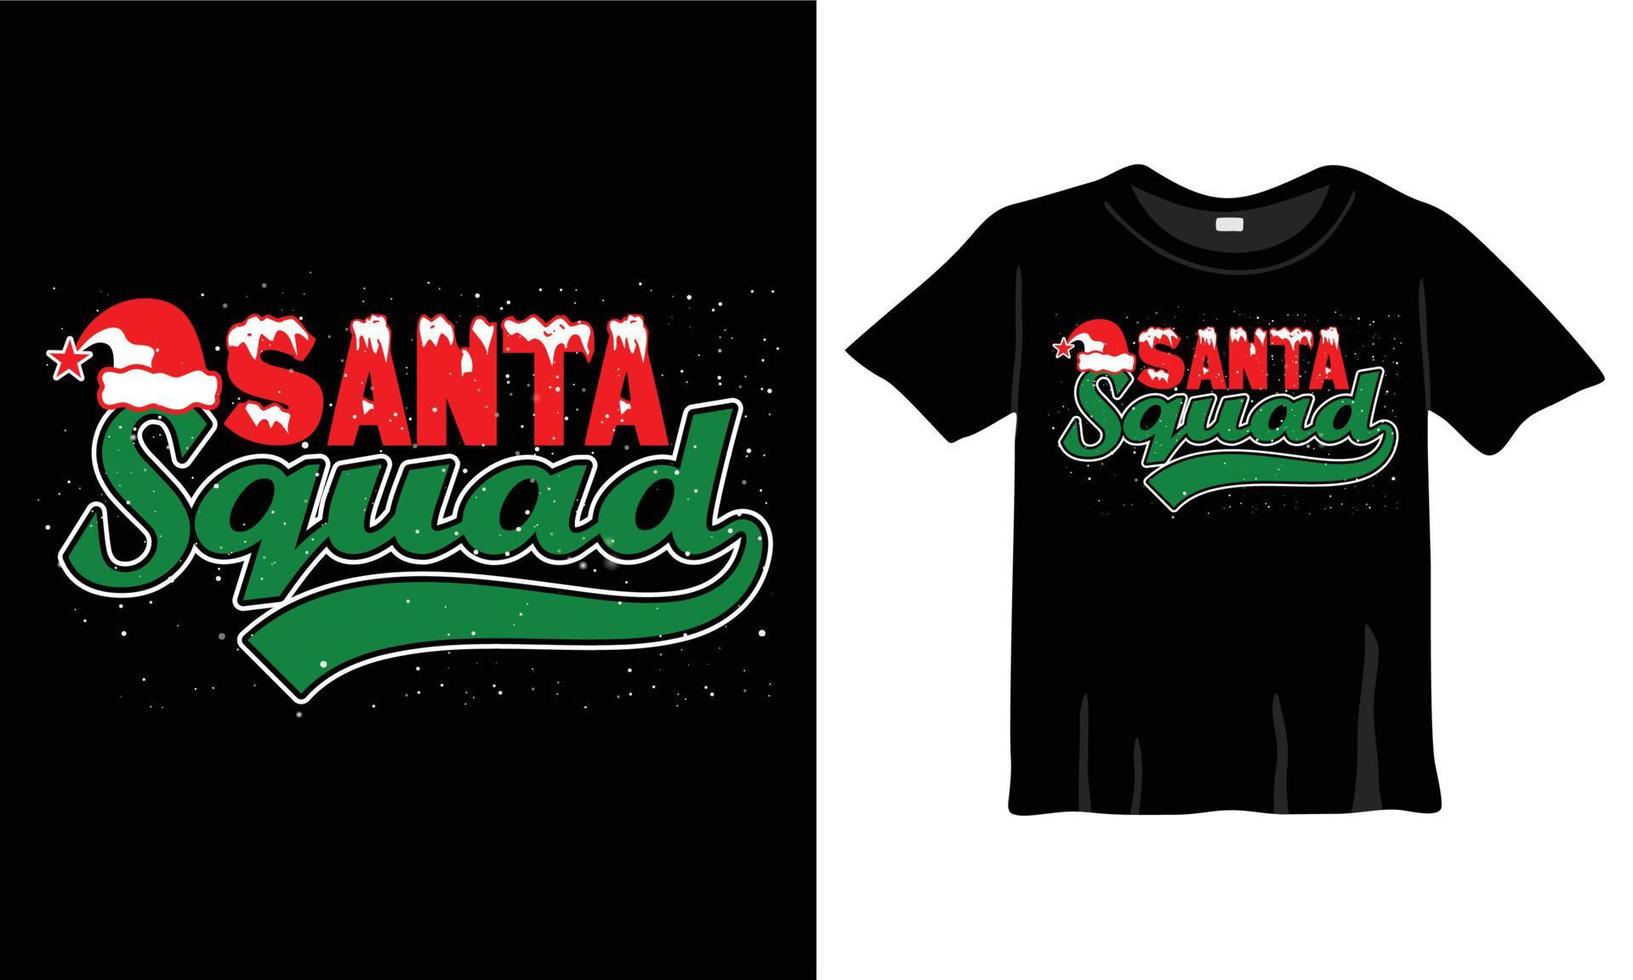 Santa Squad Christmas T-Shirt Design Template for Christmas Celebration. Good for Greeting cards, t-shirts, mugs, and gifts. For Men, Women, and Baby clothing vector